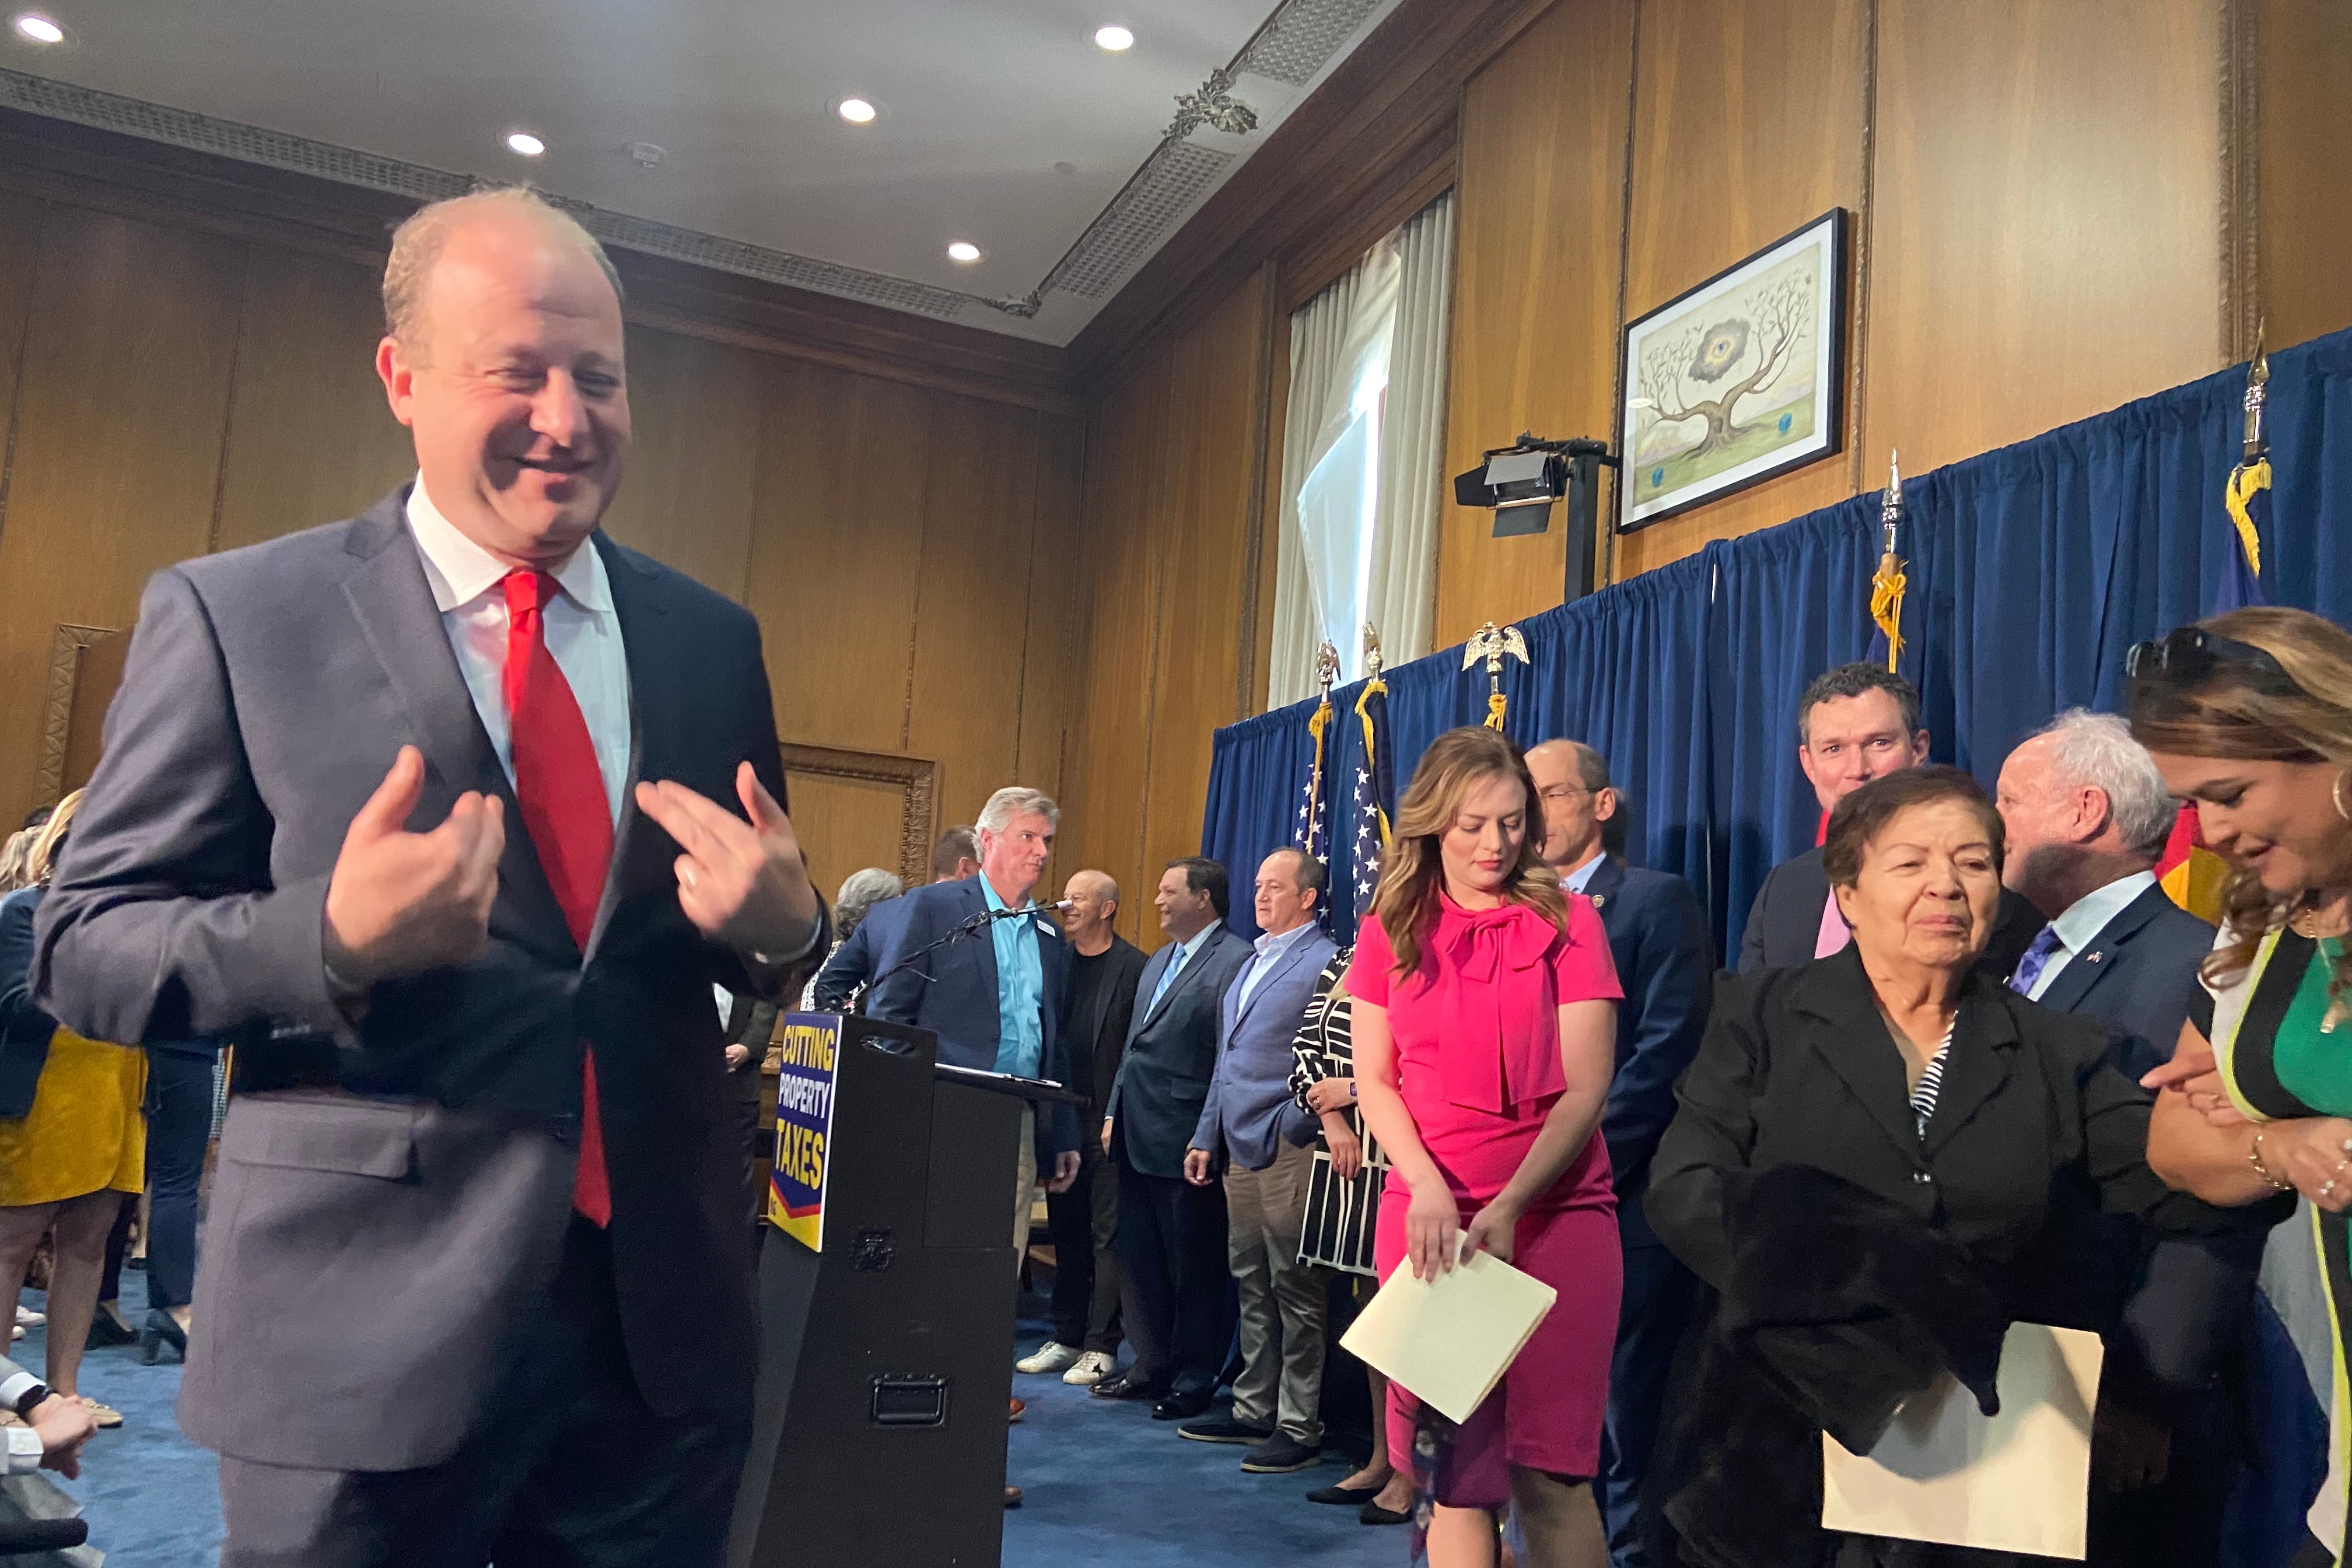 Gov. Jared Polis, standing in a suit and a red tie, seems to point to himself while smiling. Men and women stand, some holding papers, behind him in front of a blue curtain.